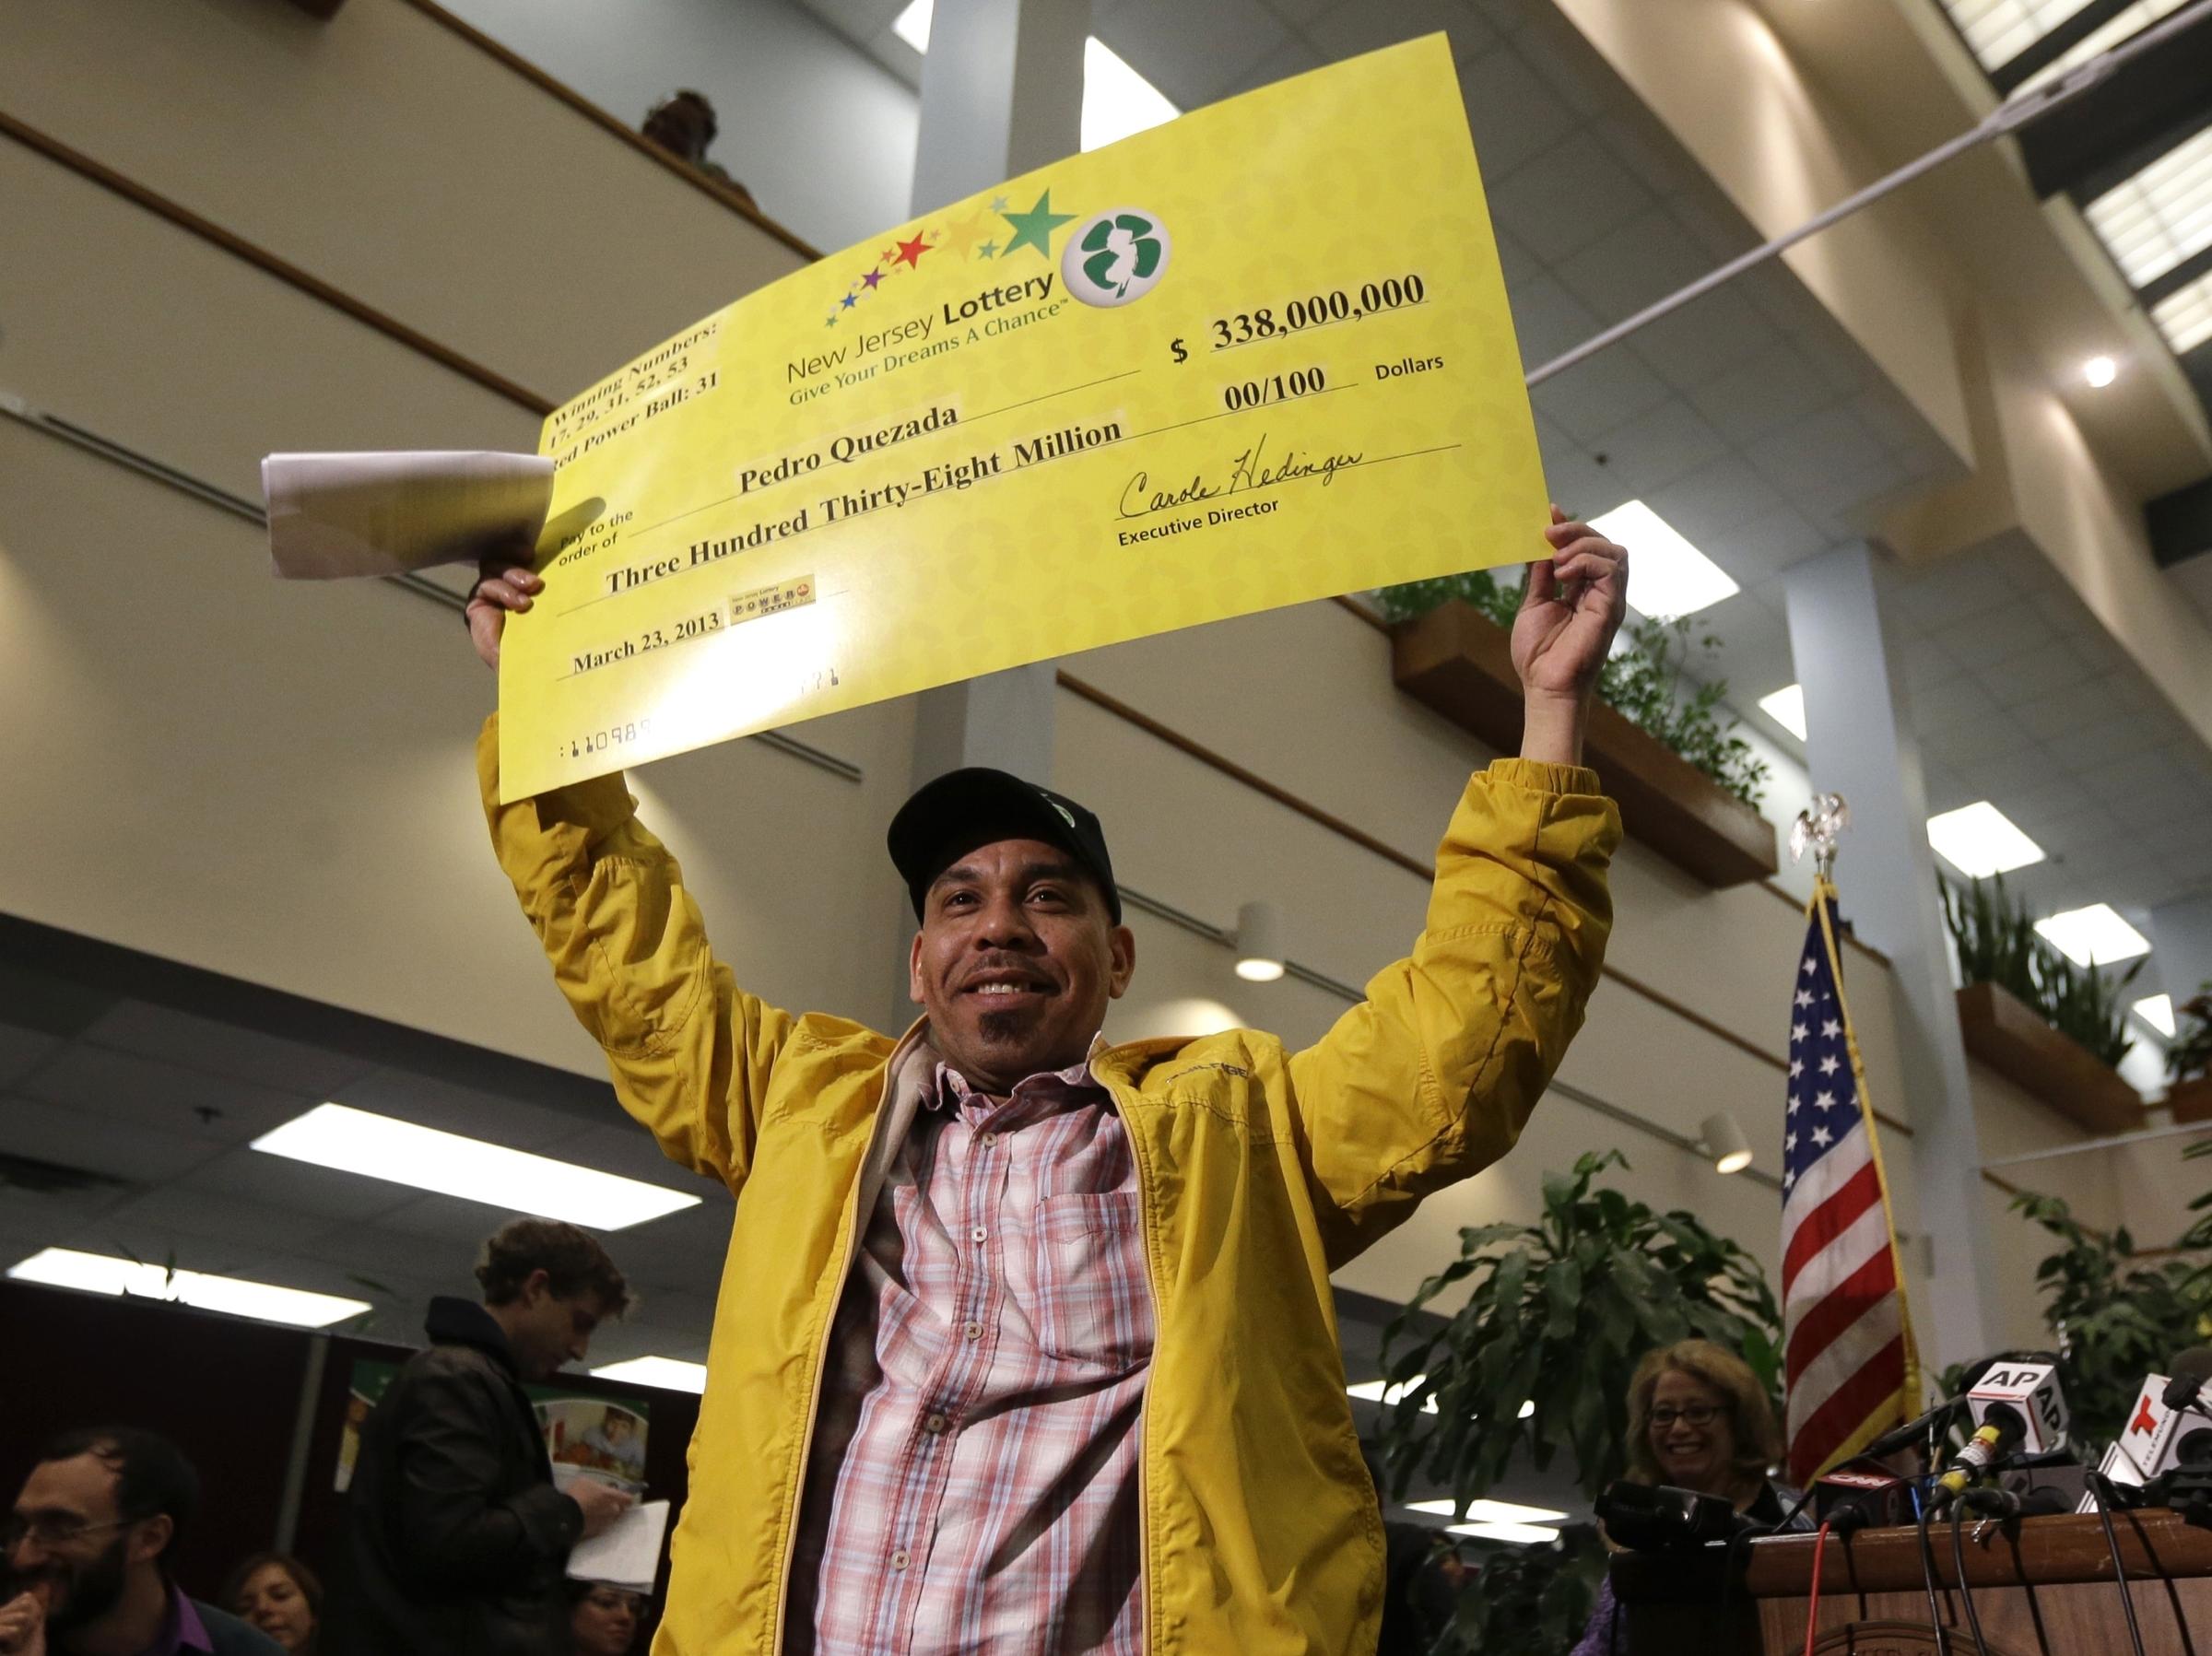 Powerball winner Pedro Quezada holds up a promotional check featuring his $...